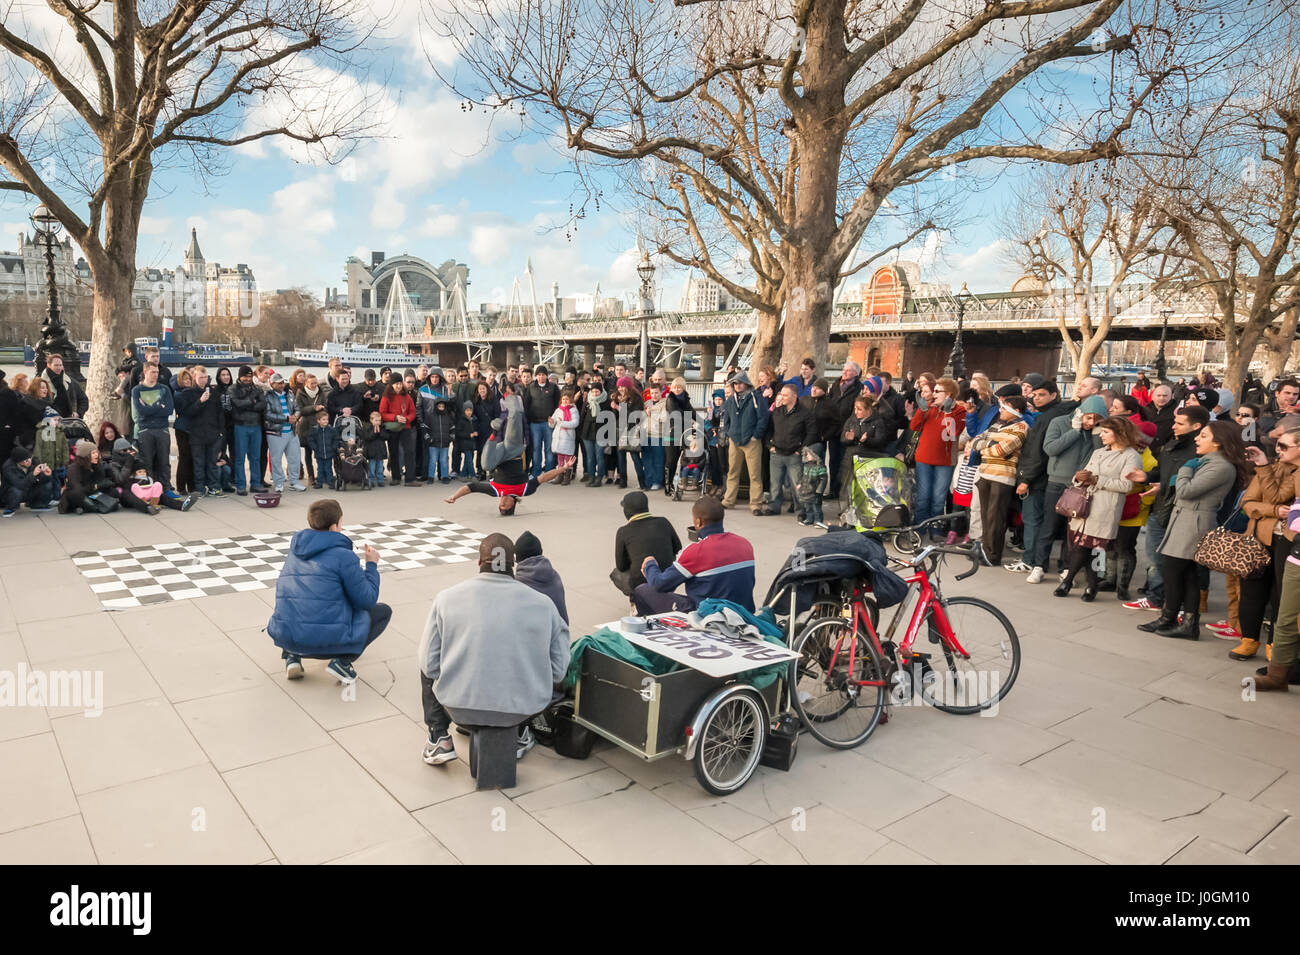 London, UK - January 27, 2013: A large crowd watching street dance performers on a cold afternoon by the South Bank of River Thames in London, UK Stock Photo